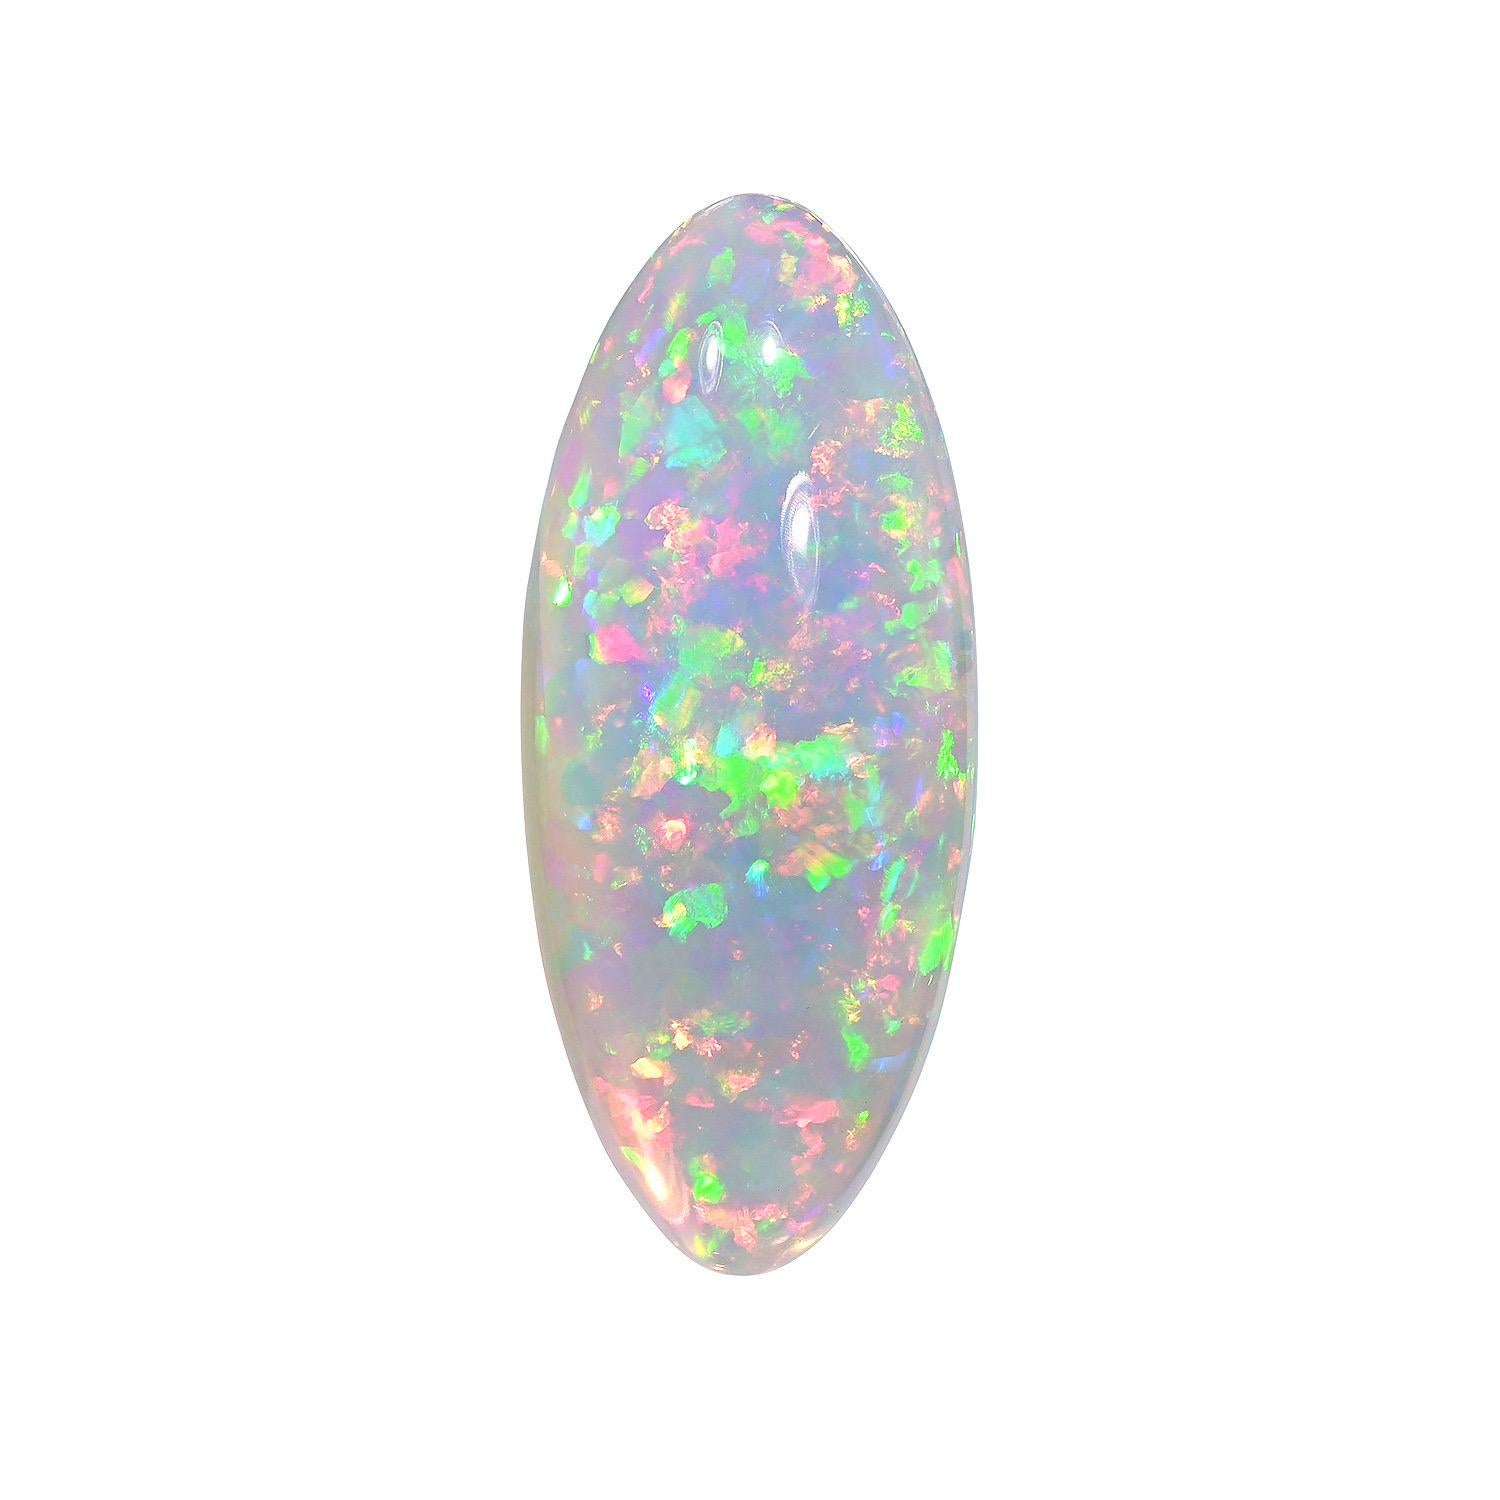 Marquise Cut Opal Stone 38.92 Carat Natural Ethiopian Marquise loose Gemstone For Sale